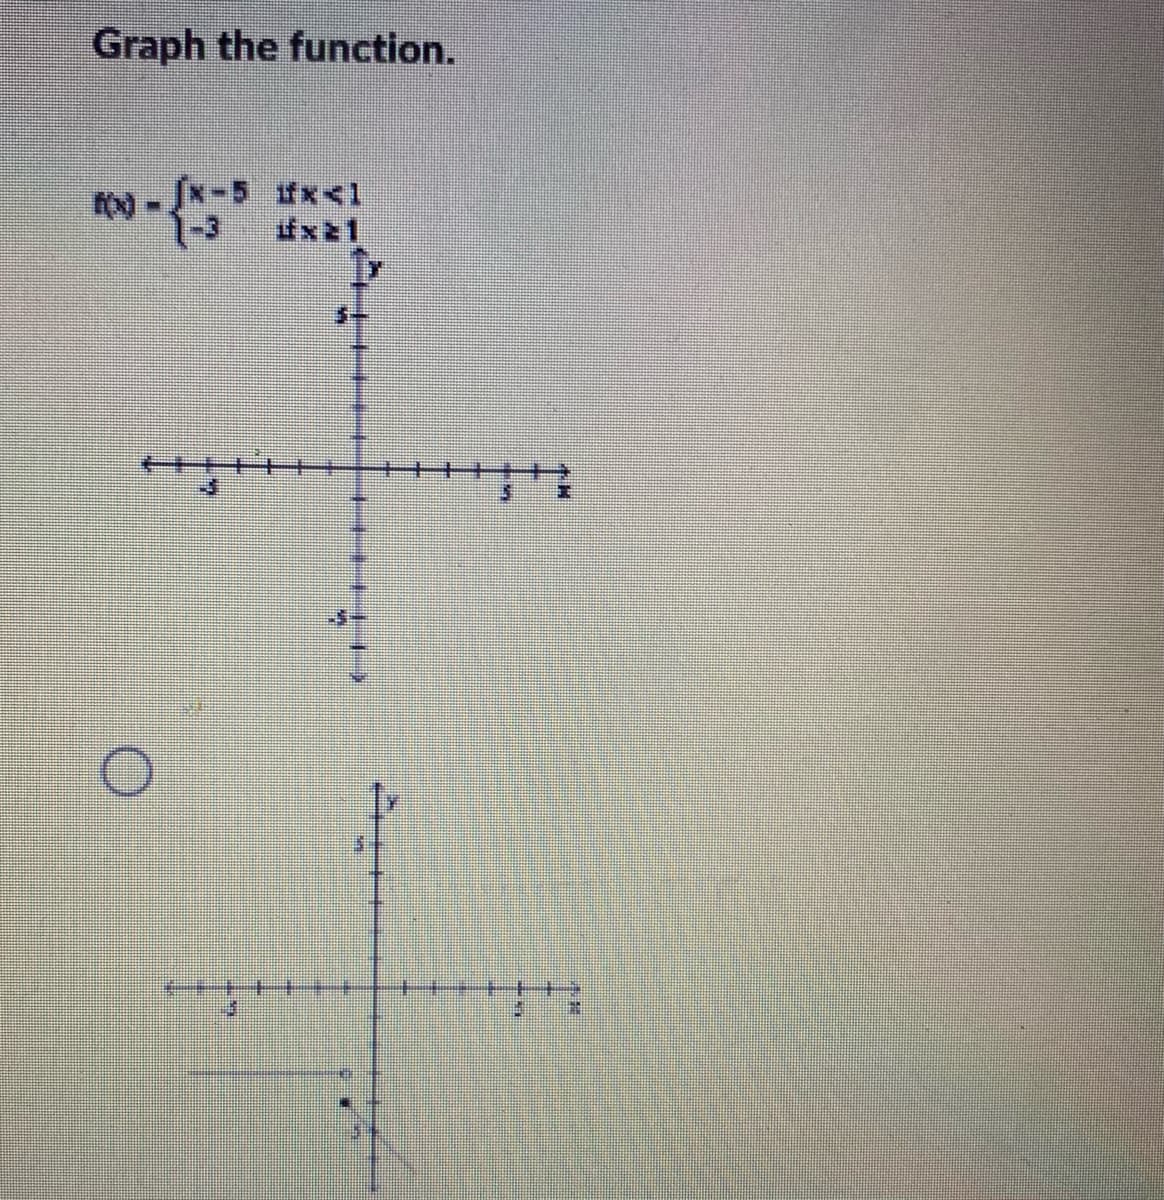 Graph the function.
1-3
ifx21
